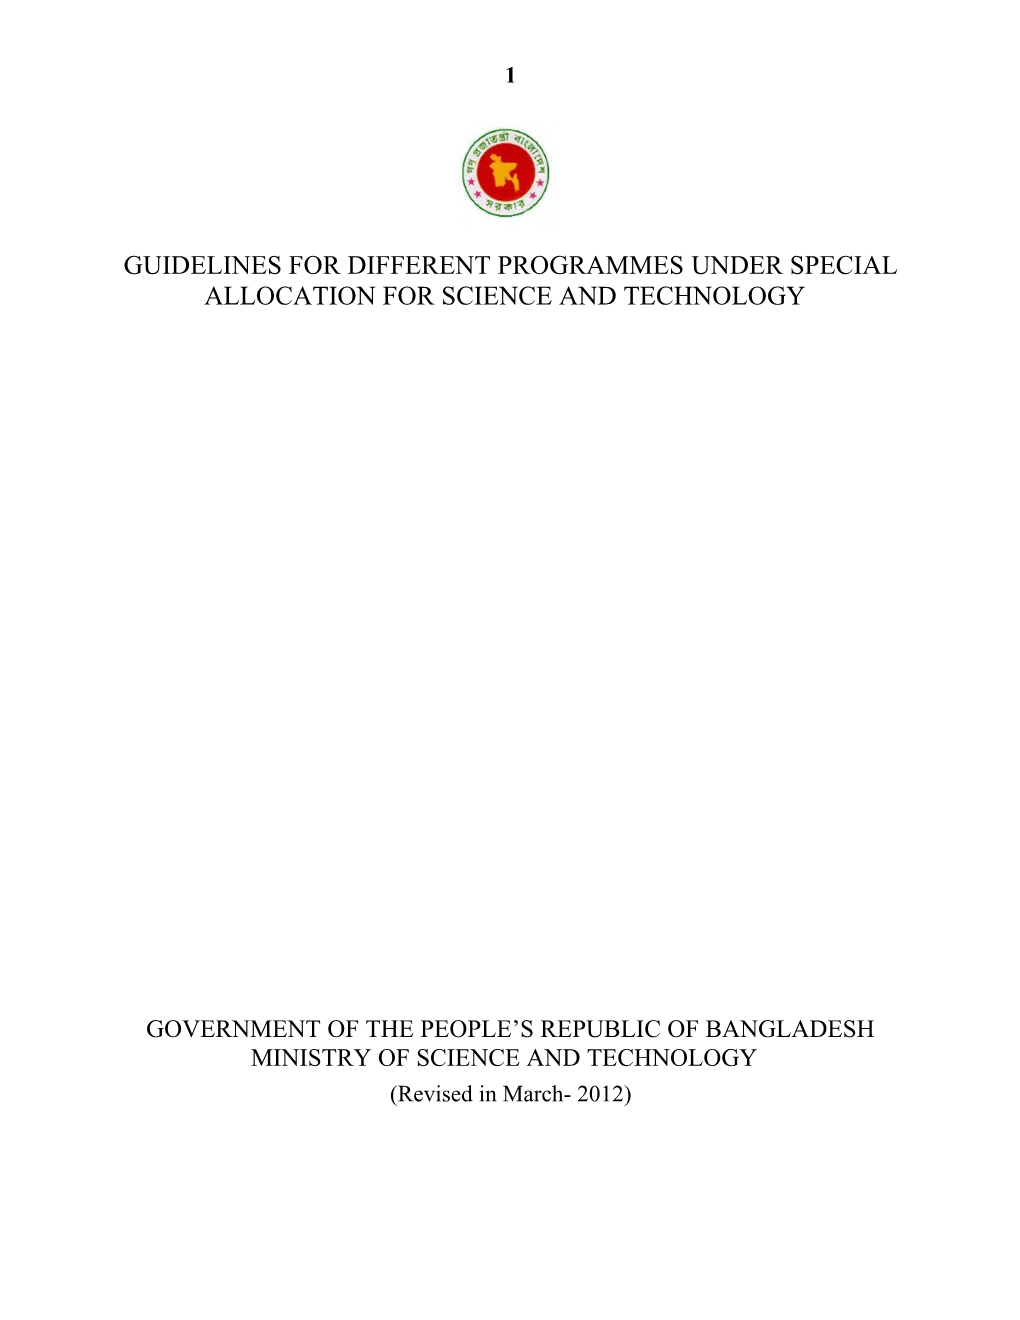 Guidelines for Different Programmes Under Special Allocation for Science and Technology